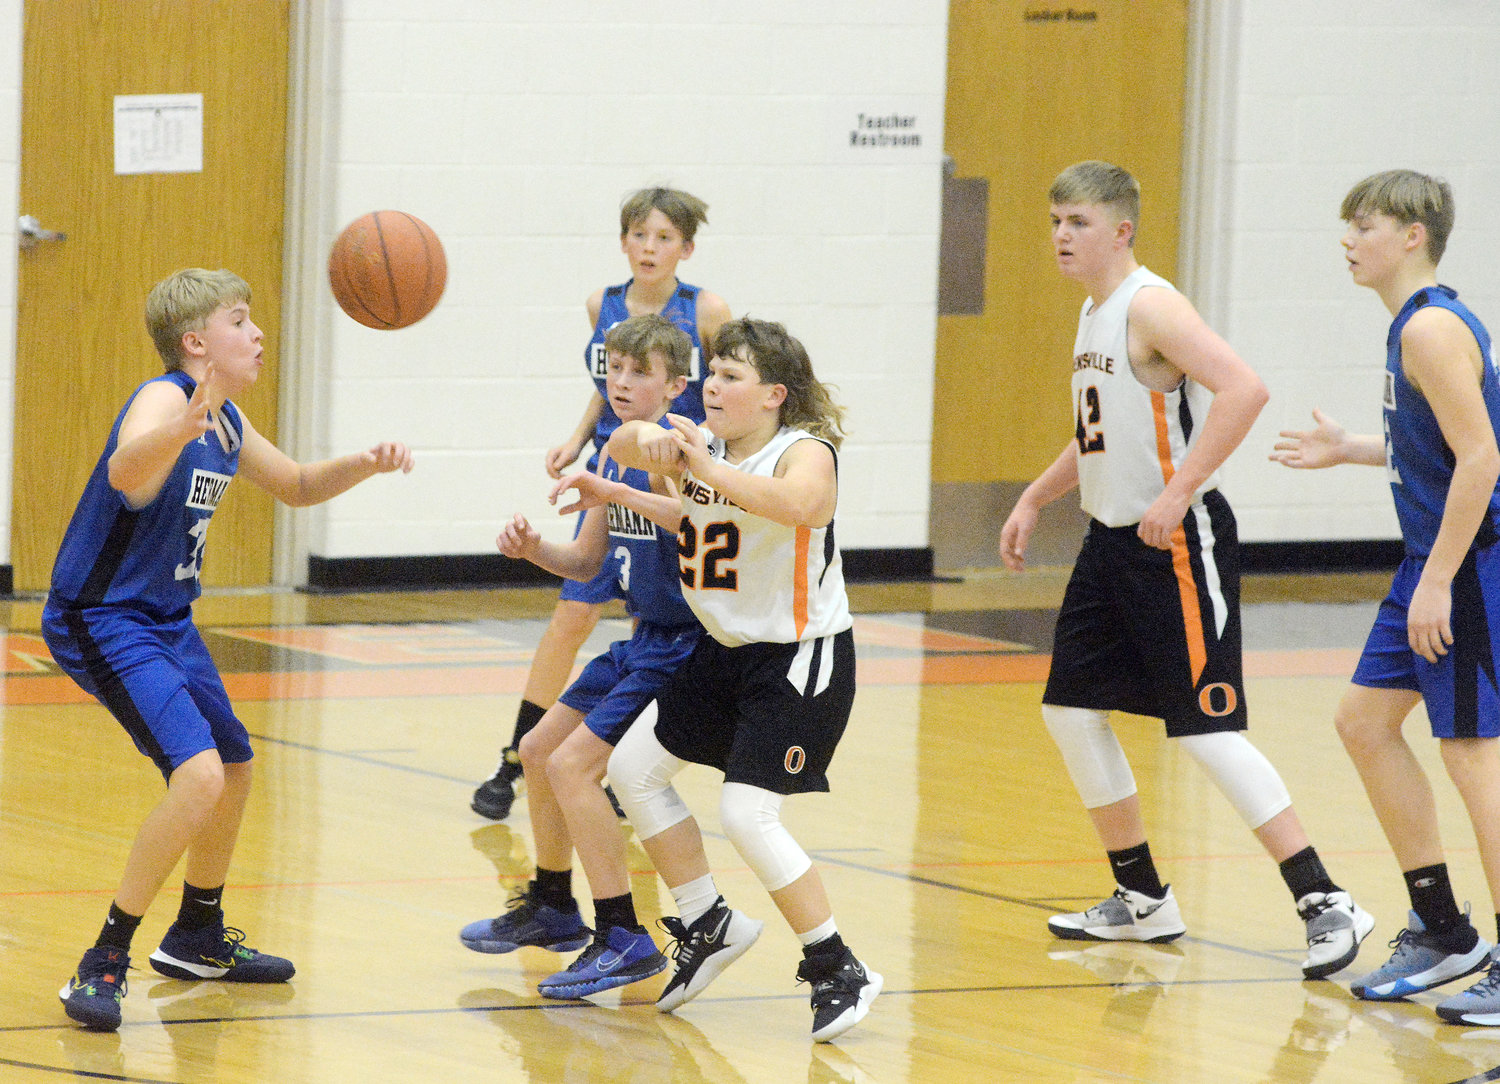 Drew Chapman center) passes the ball away from Hermann’s Zachary Fredrick (far left) and Kruz Eldringhoff (3) for Owensville during their 39-32 victory Monday night over Hermann’s Bearcats in a middle school basketball doubleheader at Owensville Elementary School (OES) with Gasconade County bragging rights on the line.